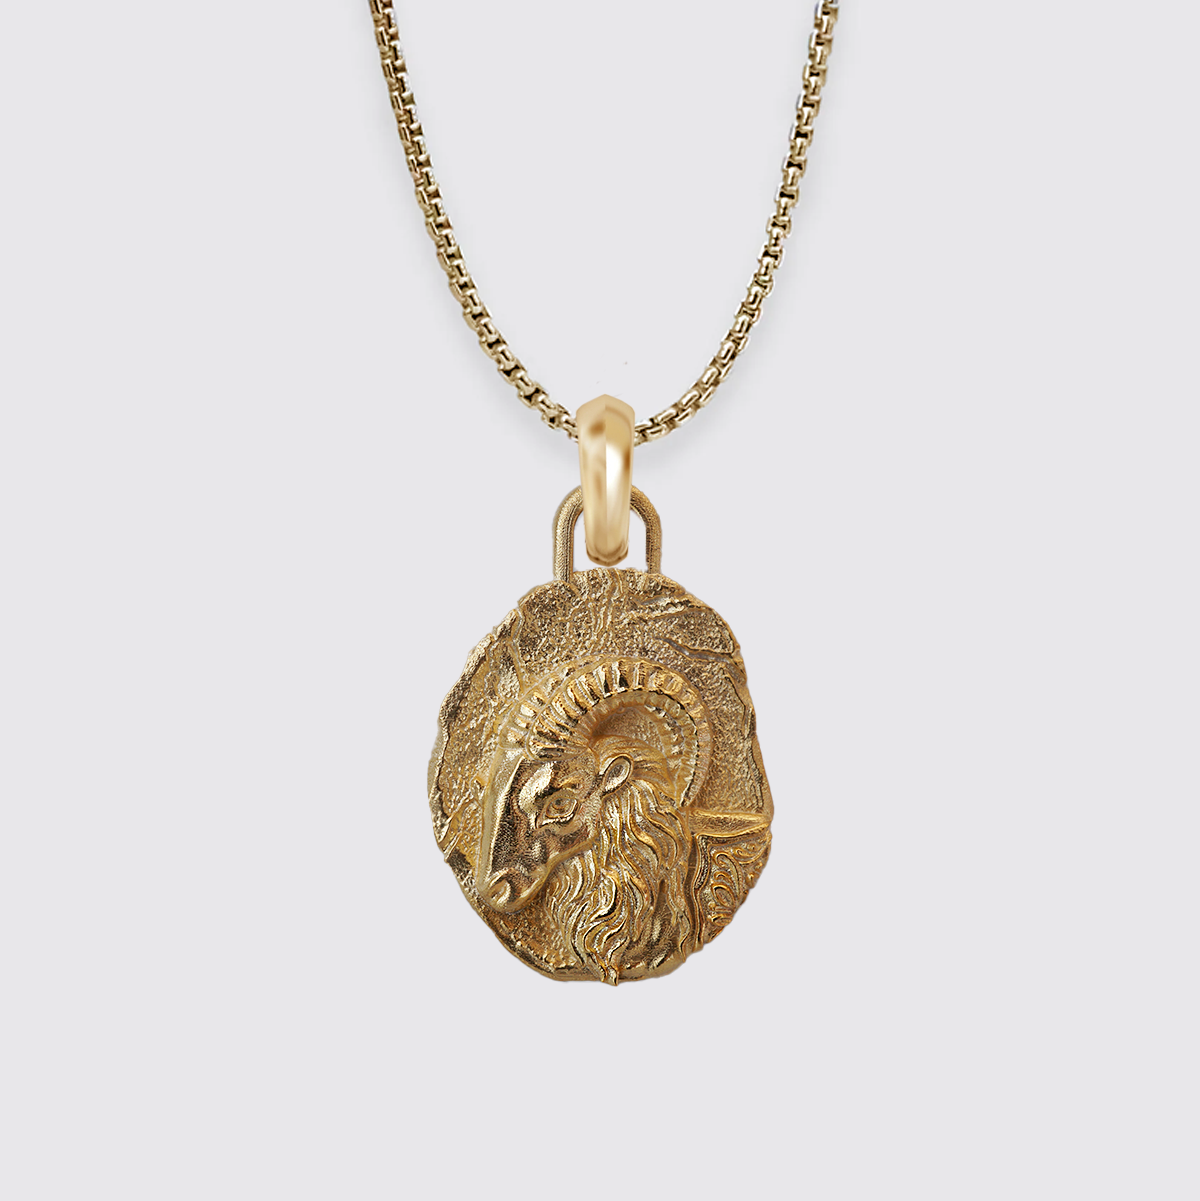 Aries Zodiac Pendant in Sterling Silver and 14K Gold